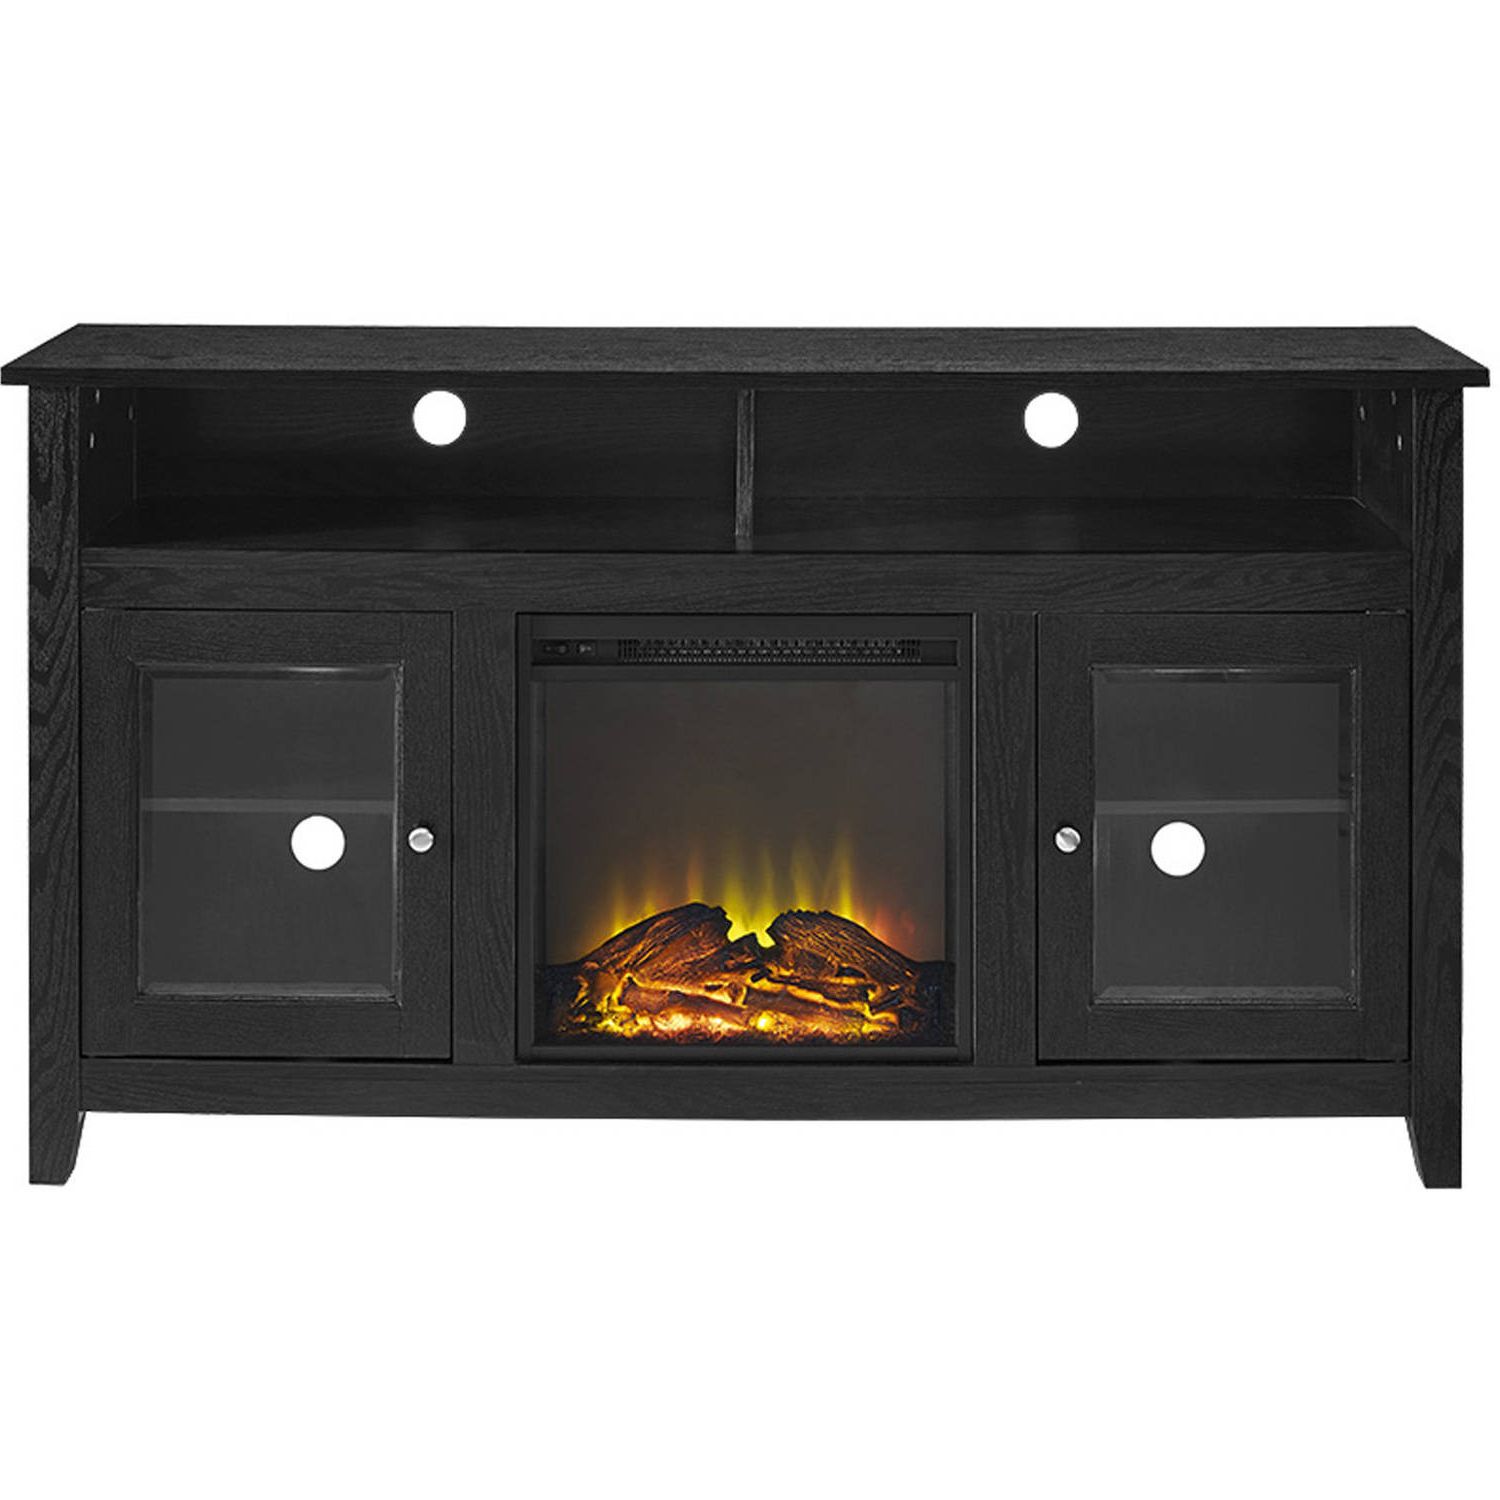 58" Wood Highboy Fireplace Tv Stand For Tvs Up To 60 Throughout Most Recently Released Jace Tv Stands For Tvs Up To 58" (View 2 of 20)